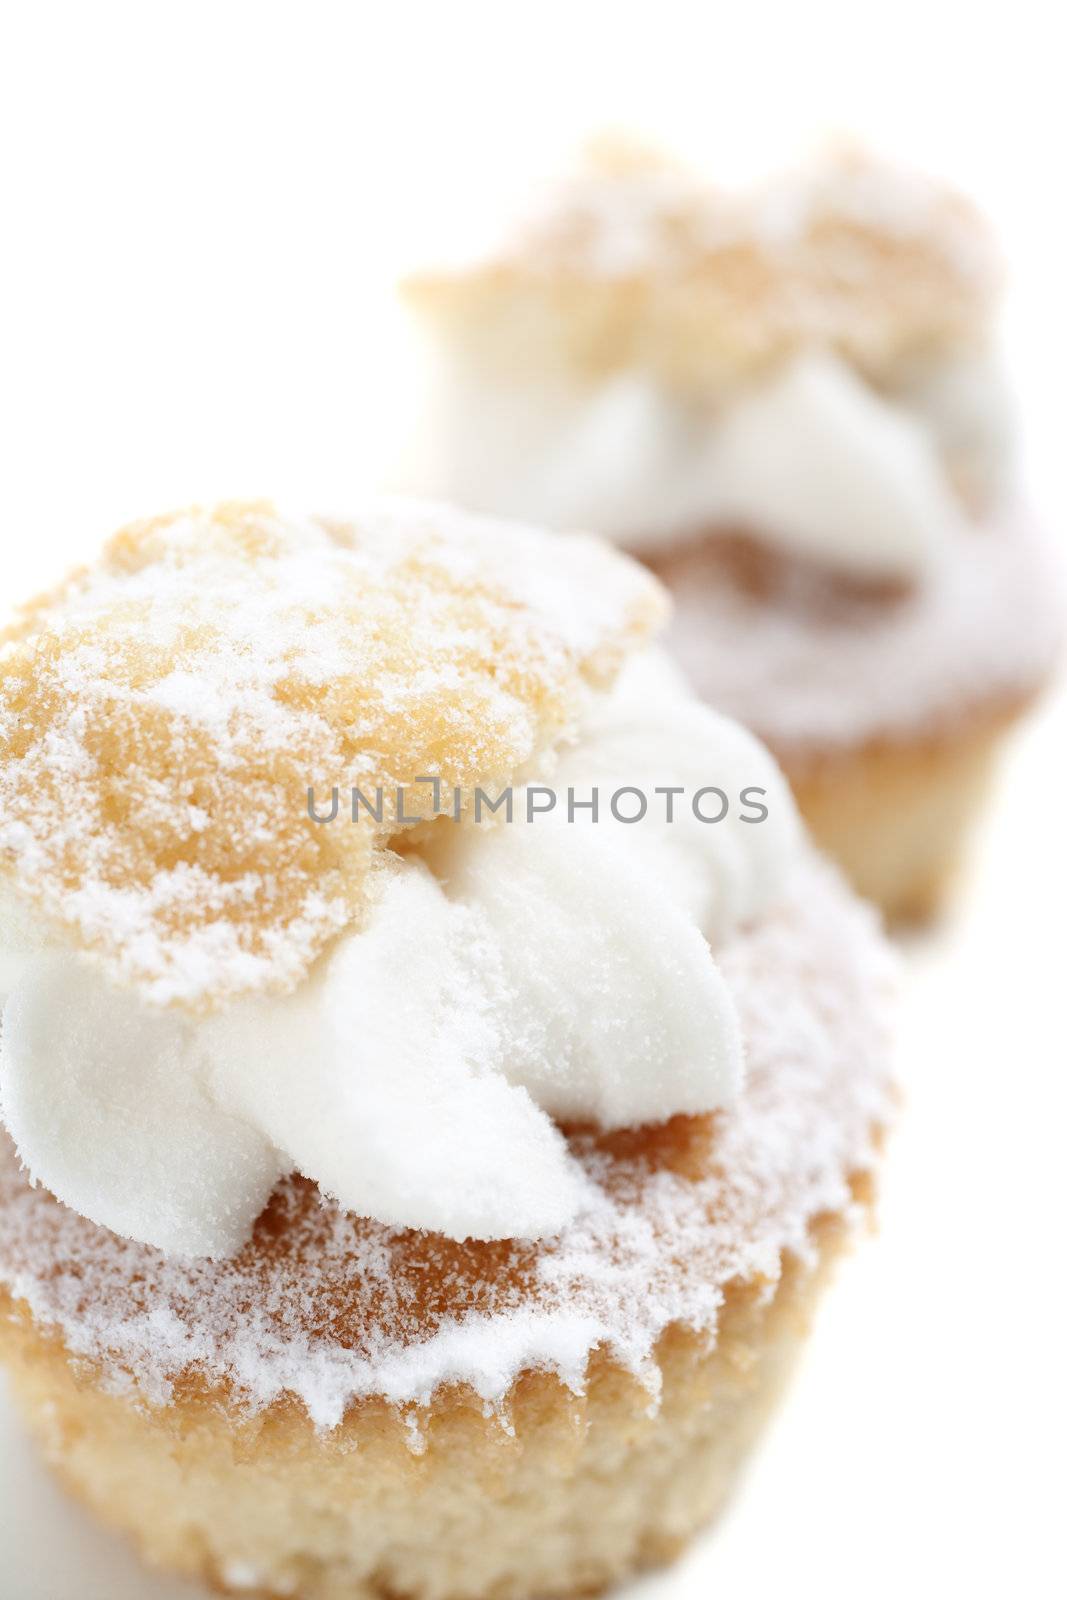 Freshly baked cup cakes with cream filling